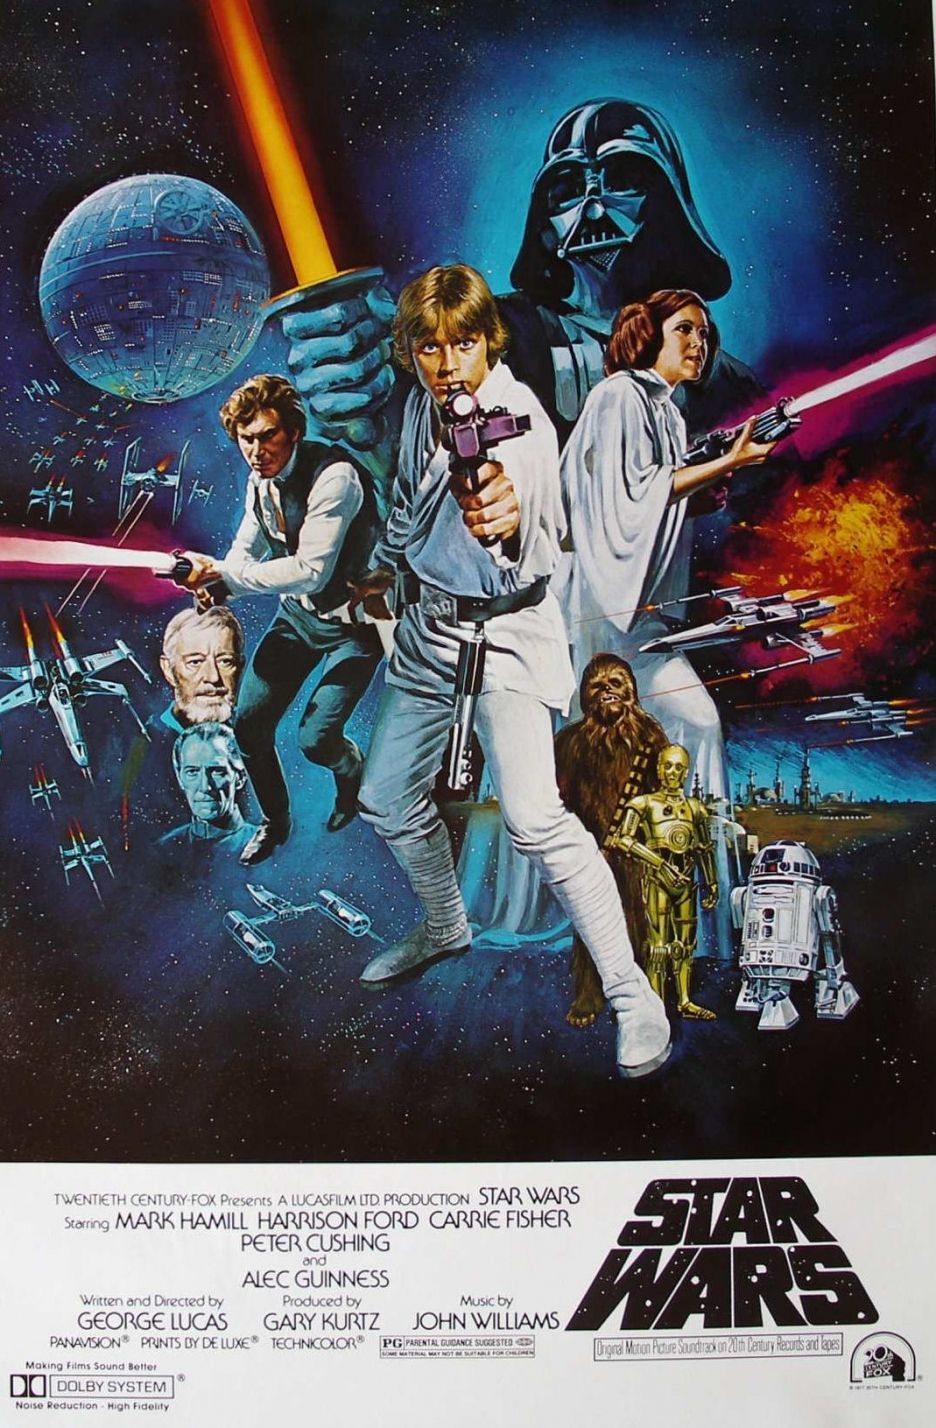 The Cast on the Star Wars: Episode IV - A New Hope Poster